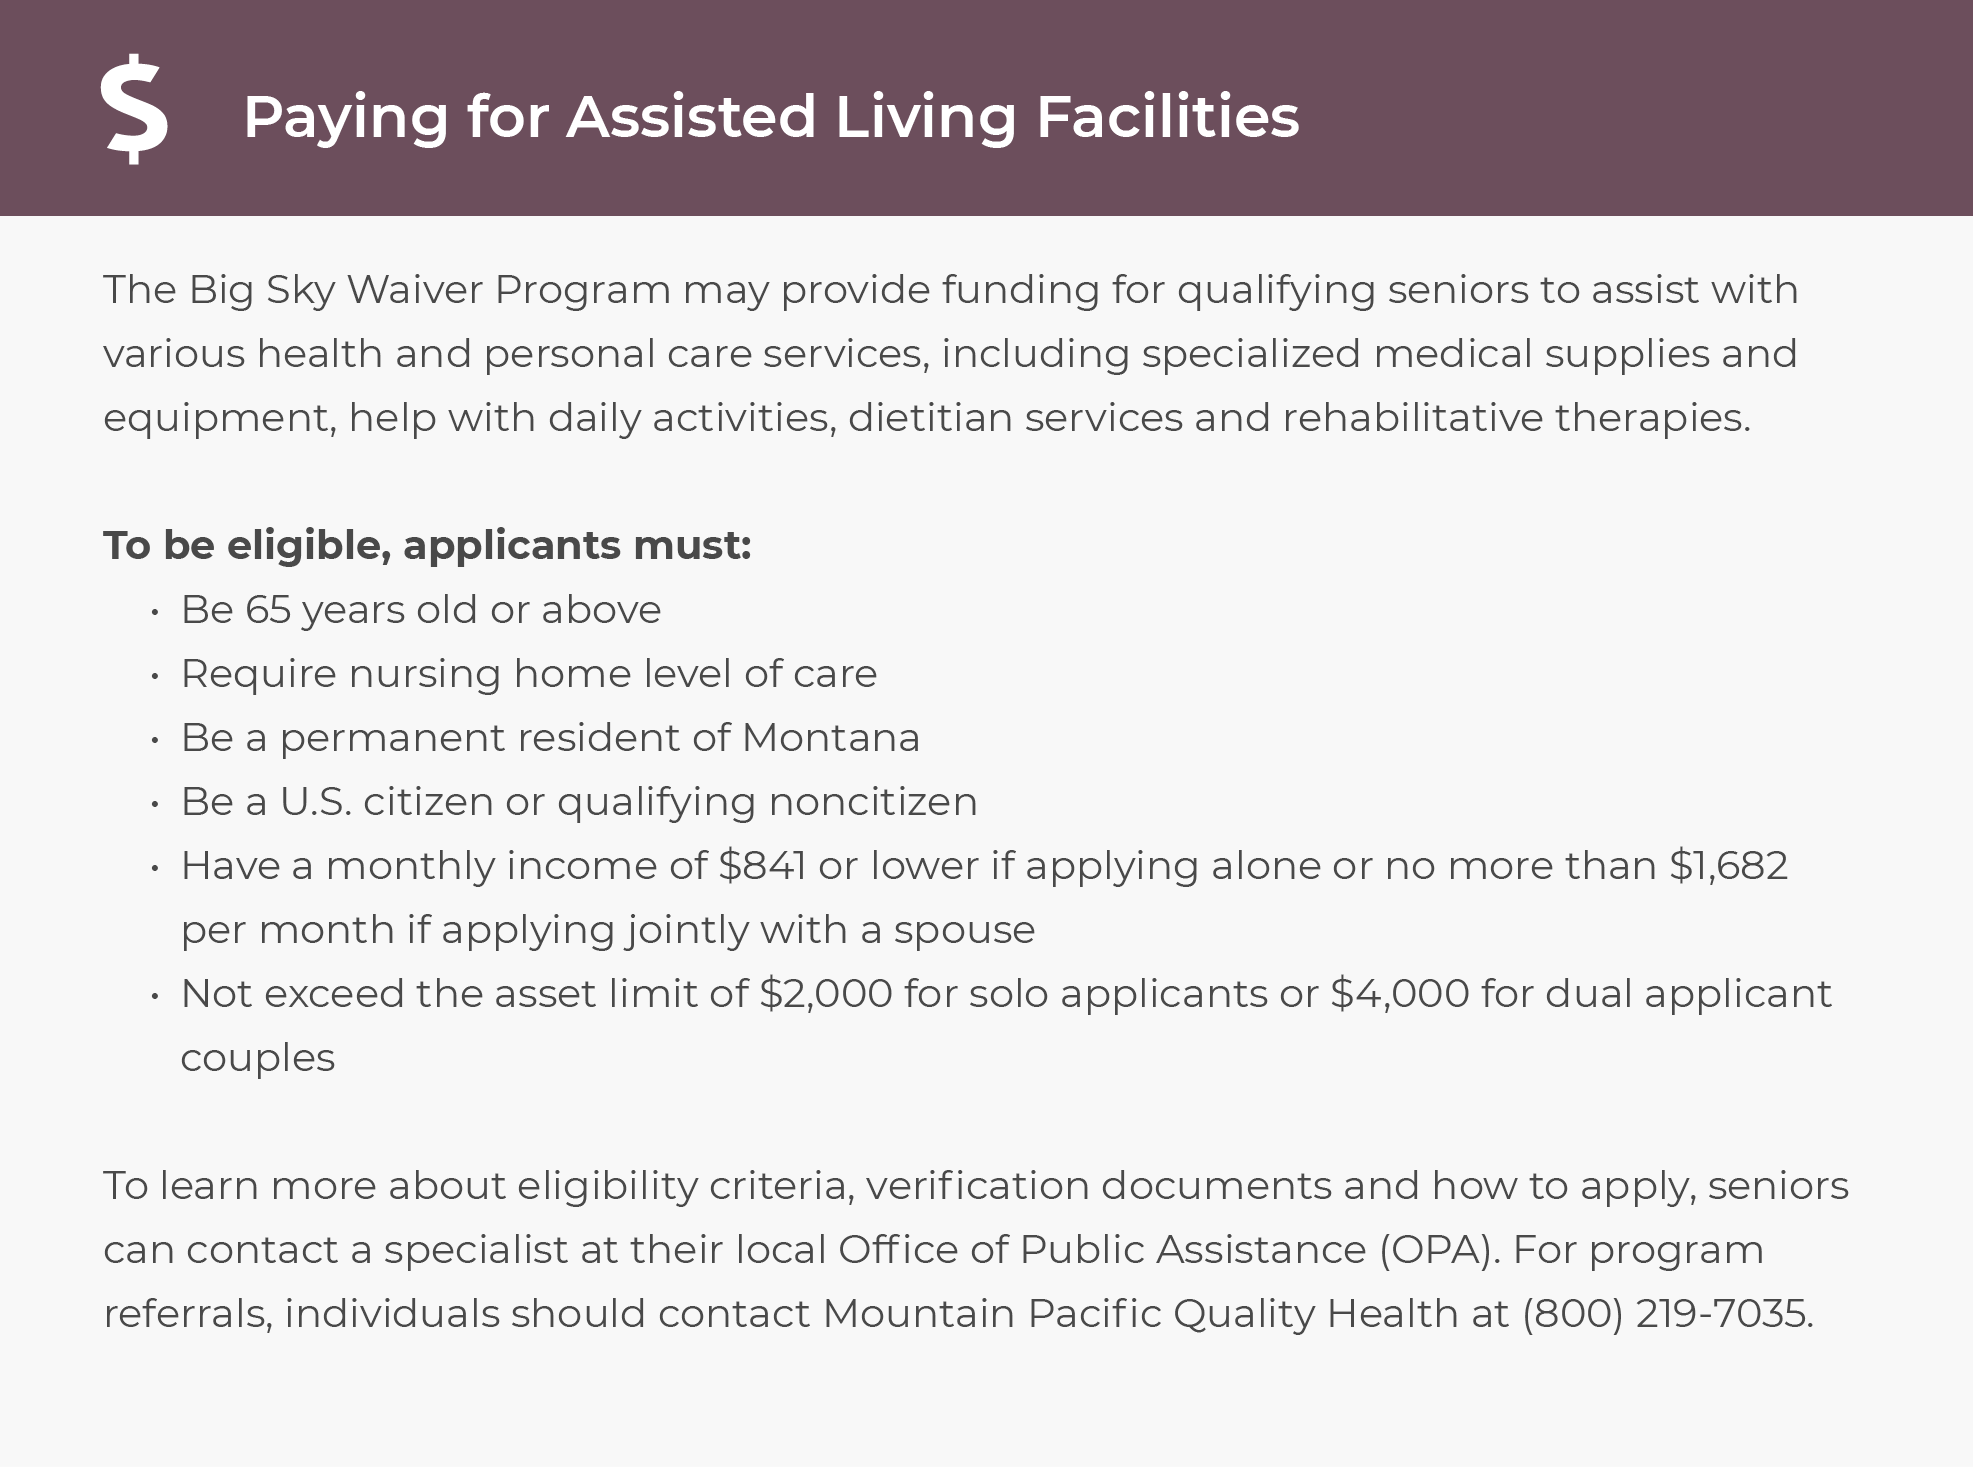 Paying for Assisted Living in Montana